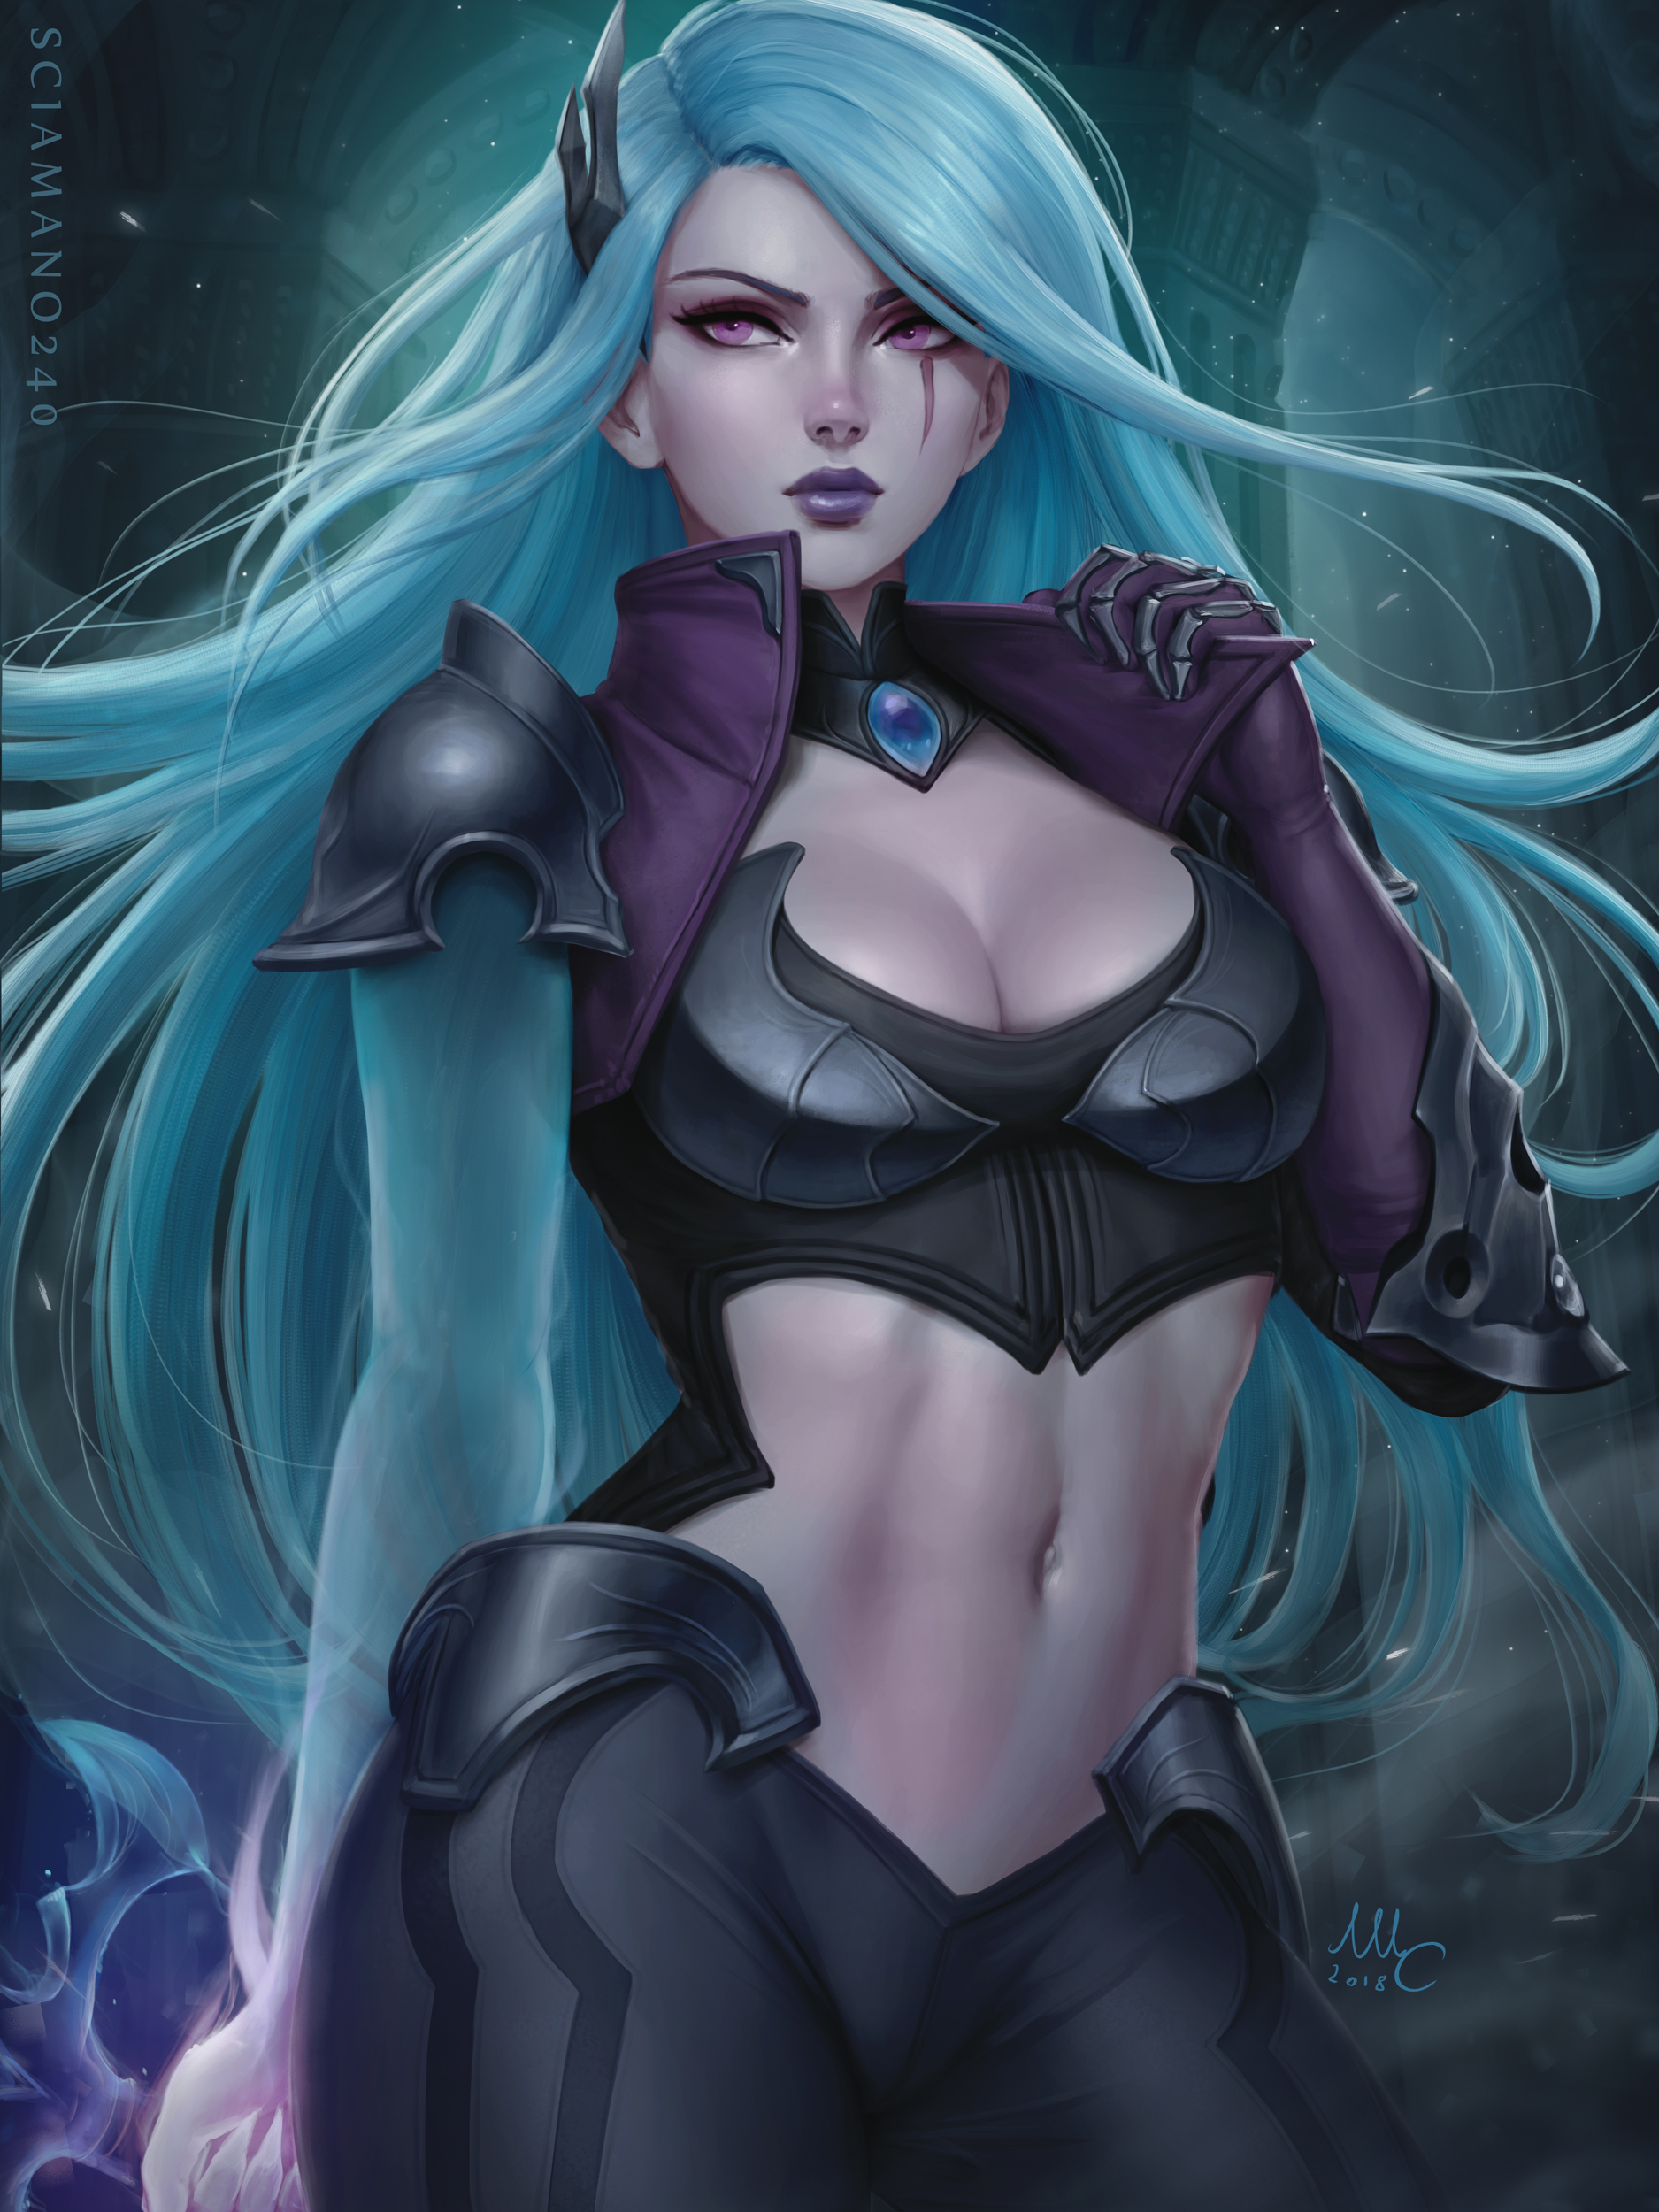 General 1875x2500 Katarina (League of Legends) League of Legends video game girls women blue hair long hair purple eyes eye scar looking away purple lipstick gloves cleavage belly portrait display fan art video game characters video game art artwork digital art drawing illustration realistic video games PC gaming Riot Games Mirco Cabbia